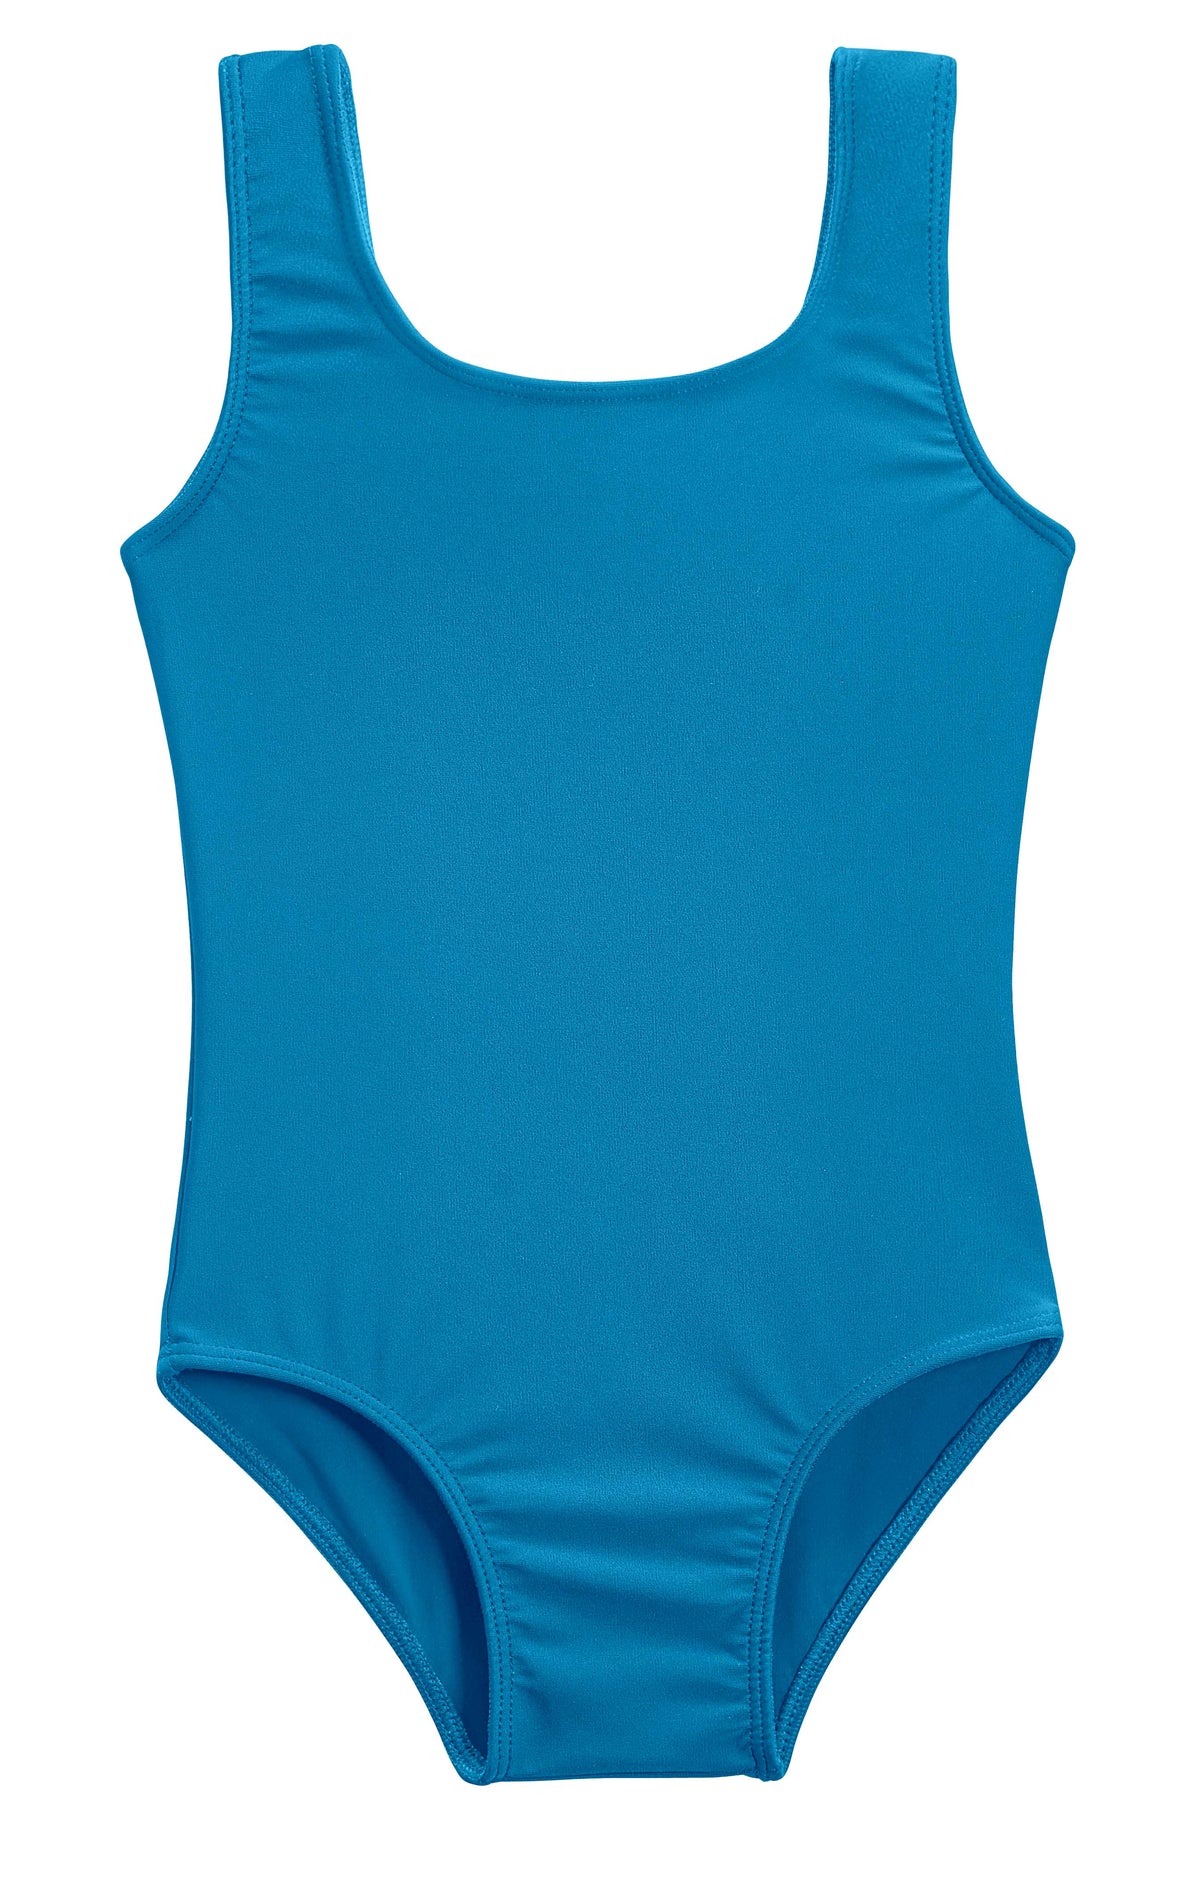 Girls UPF 50+ One Piece Swimsuit | Teal